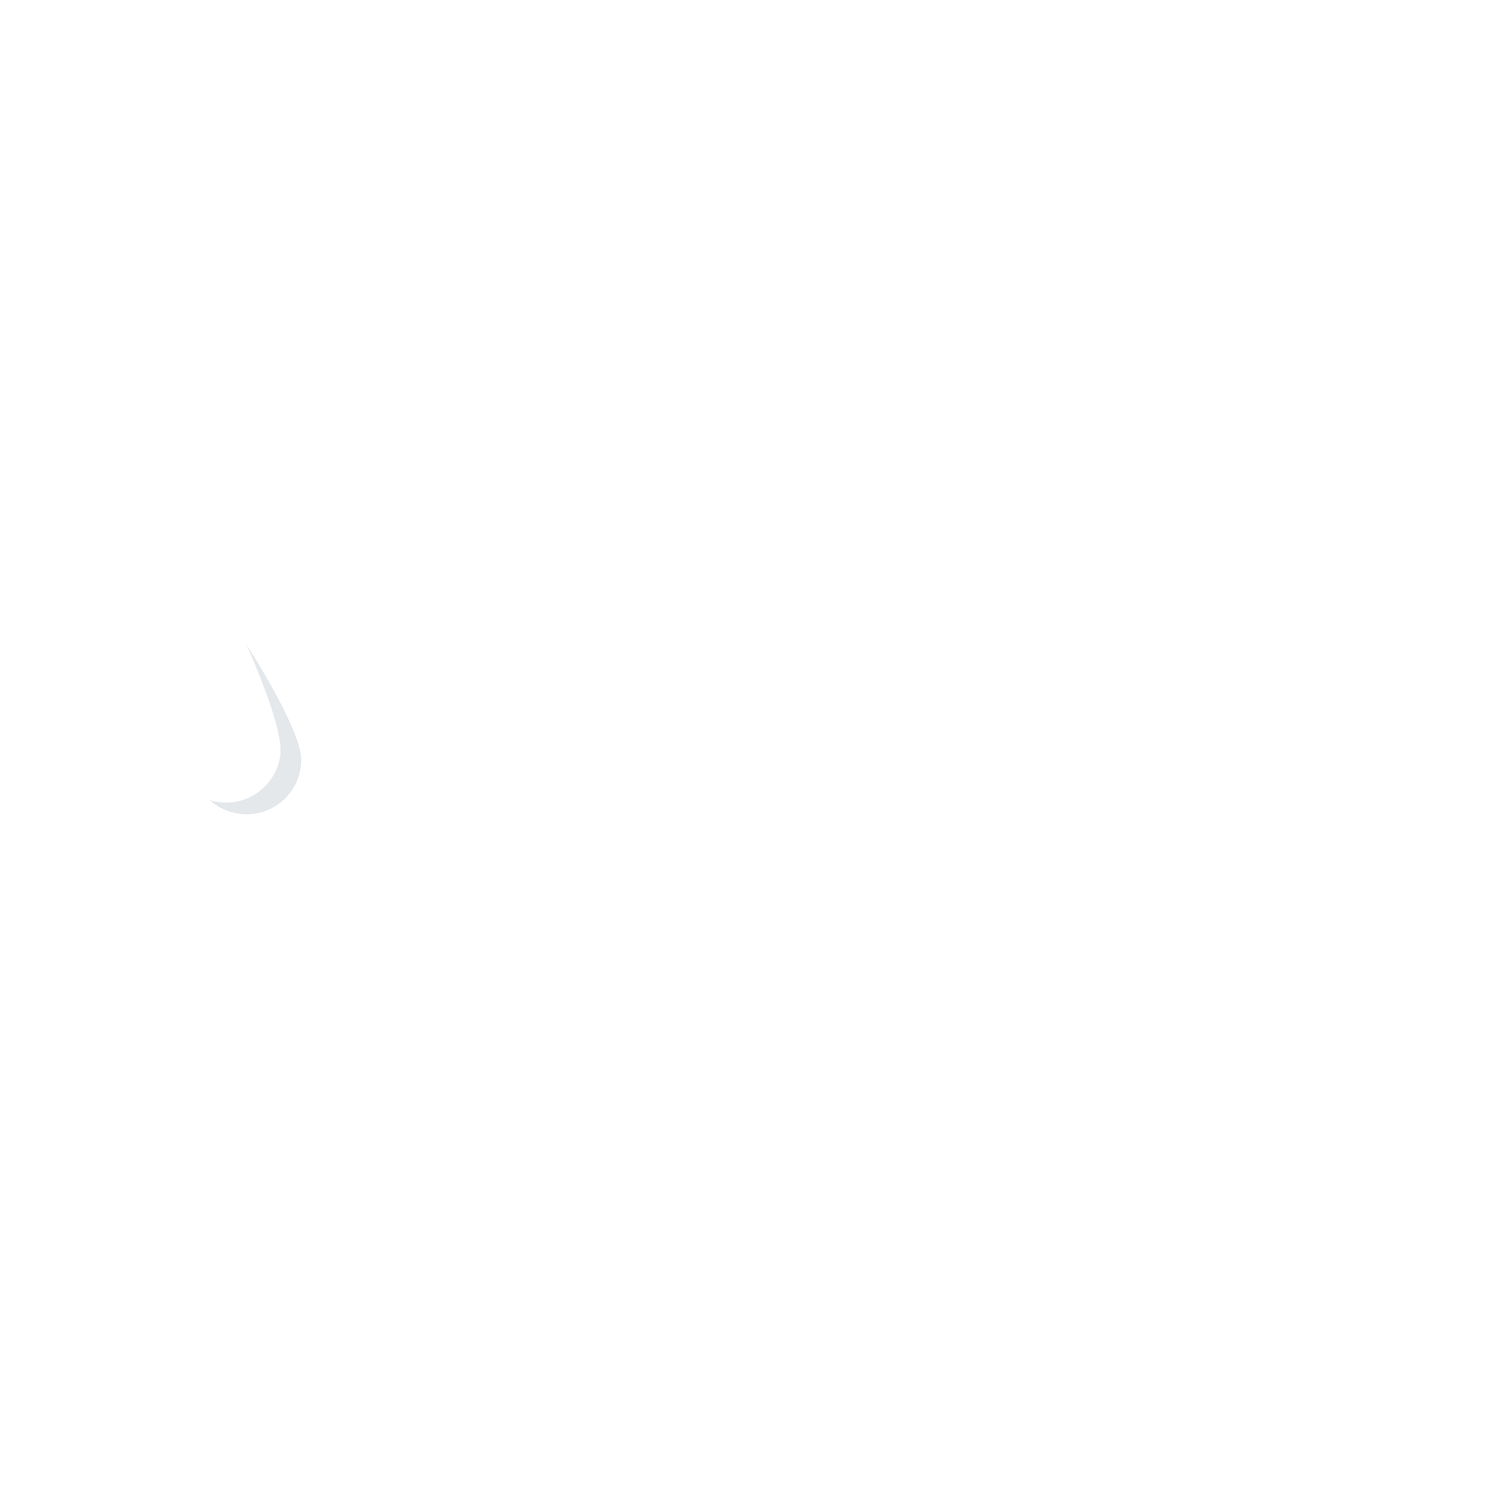 ABREAST Network